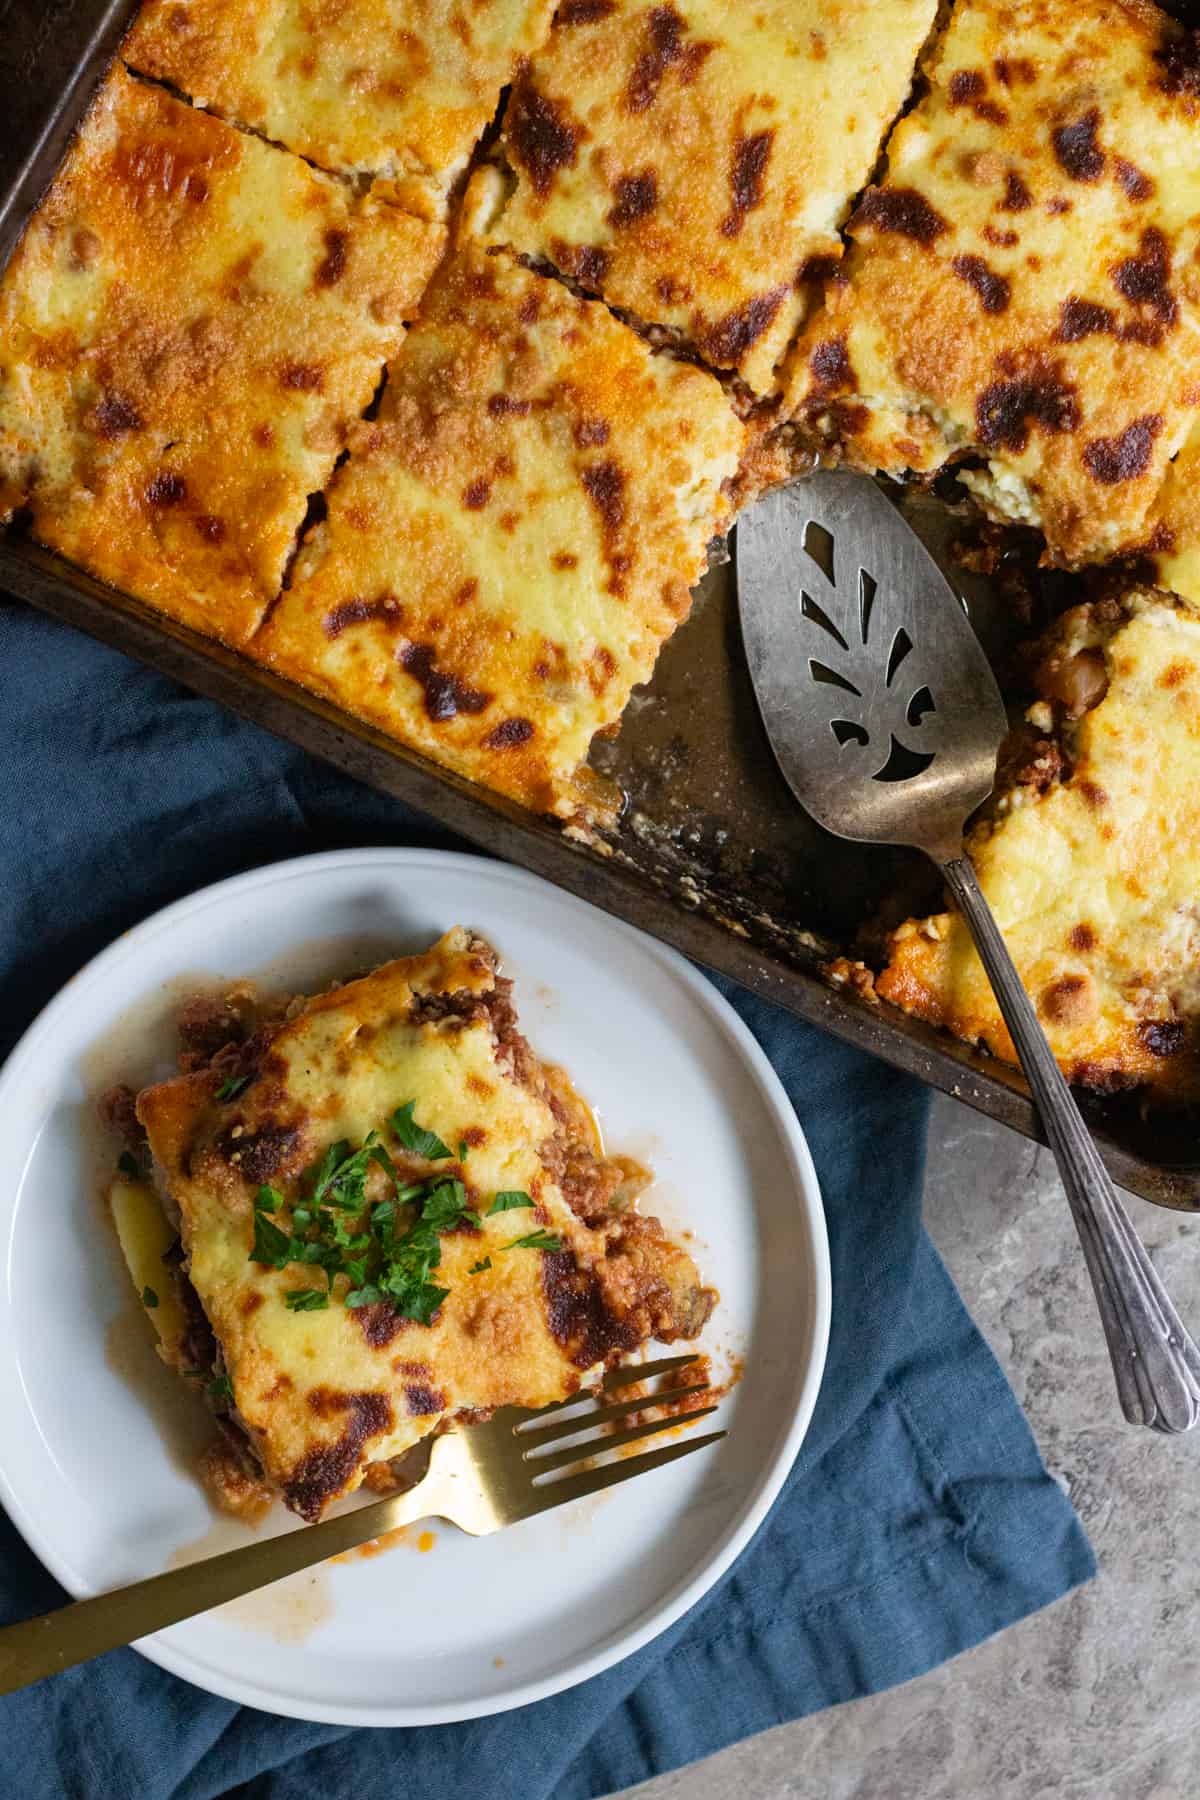 Greek moussaka is a classic comfort food of the Mediterranean region. This step by step moussaka recipe will show you how easy and comforting it is to make this delicious eggplant casserole.